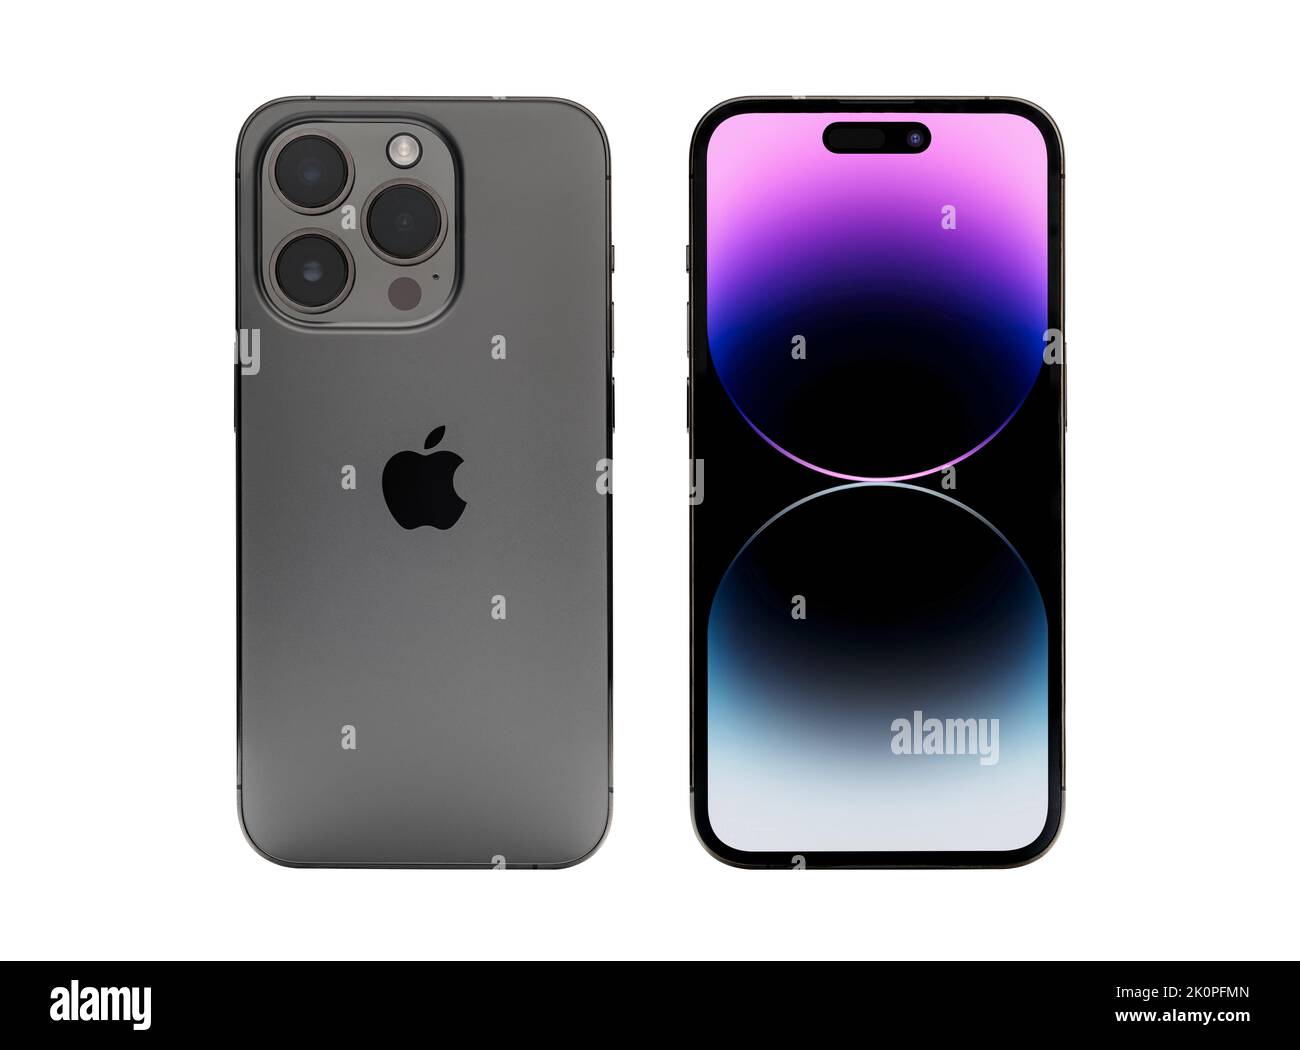 Antalya, Turkey - September 08, 2022: Newly released iphone 14 pro mockup set with back and front angles Stock Photo